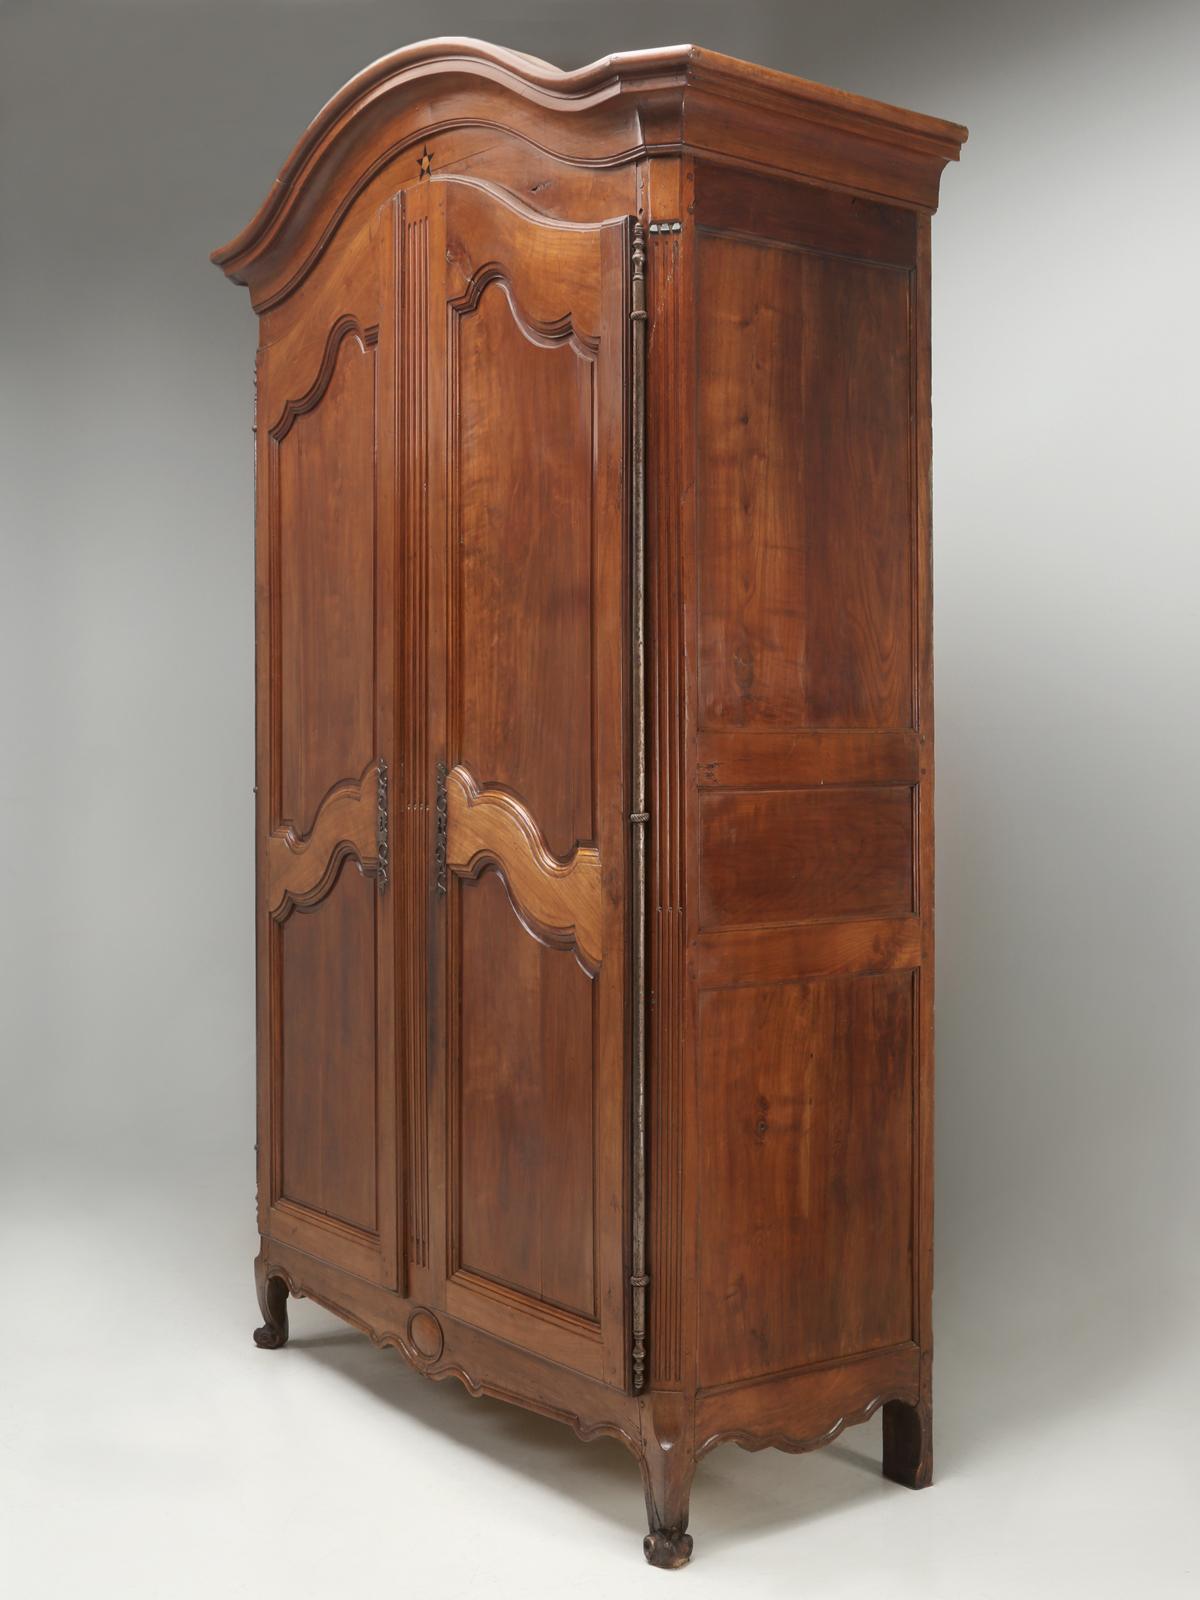 French Louis XV style armoire, that has lived a very sheltered life for the last 200-years, in the southwest city of Toulouse, France. Finding an unrestored, two century old piece of French furniture, that has escaped the hands of amateur restorers